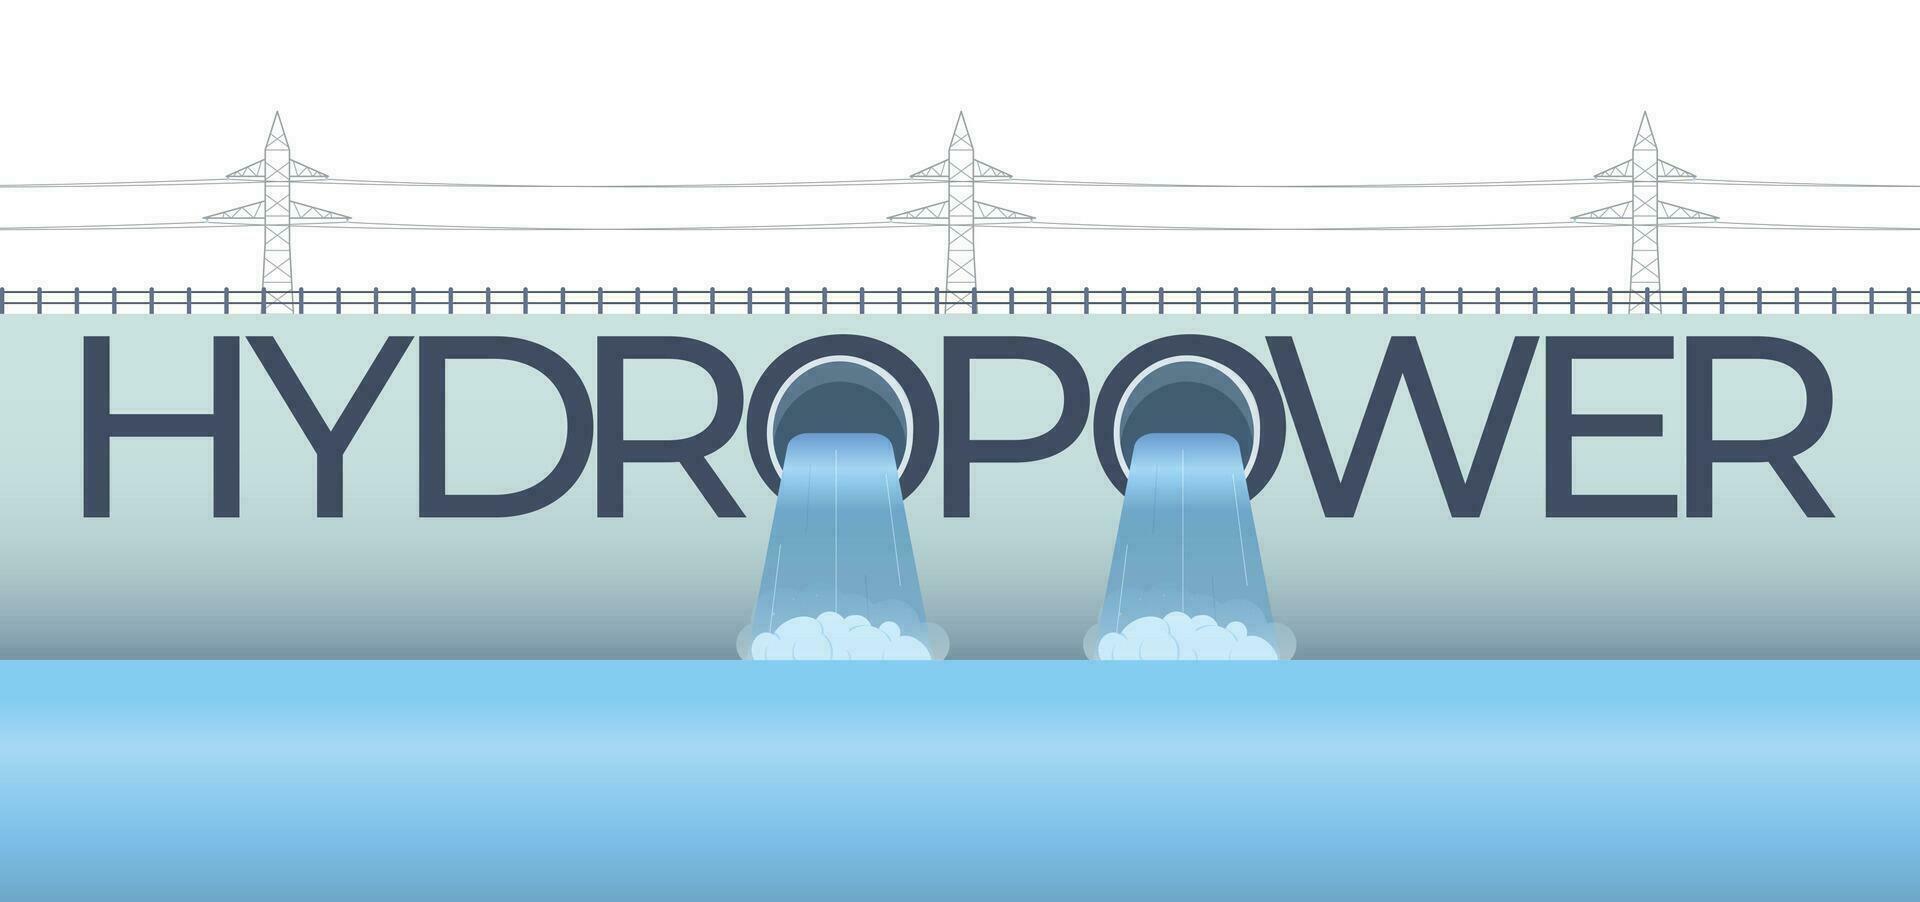 Hydro Station Text Banner vector